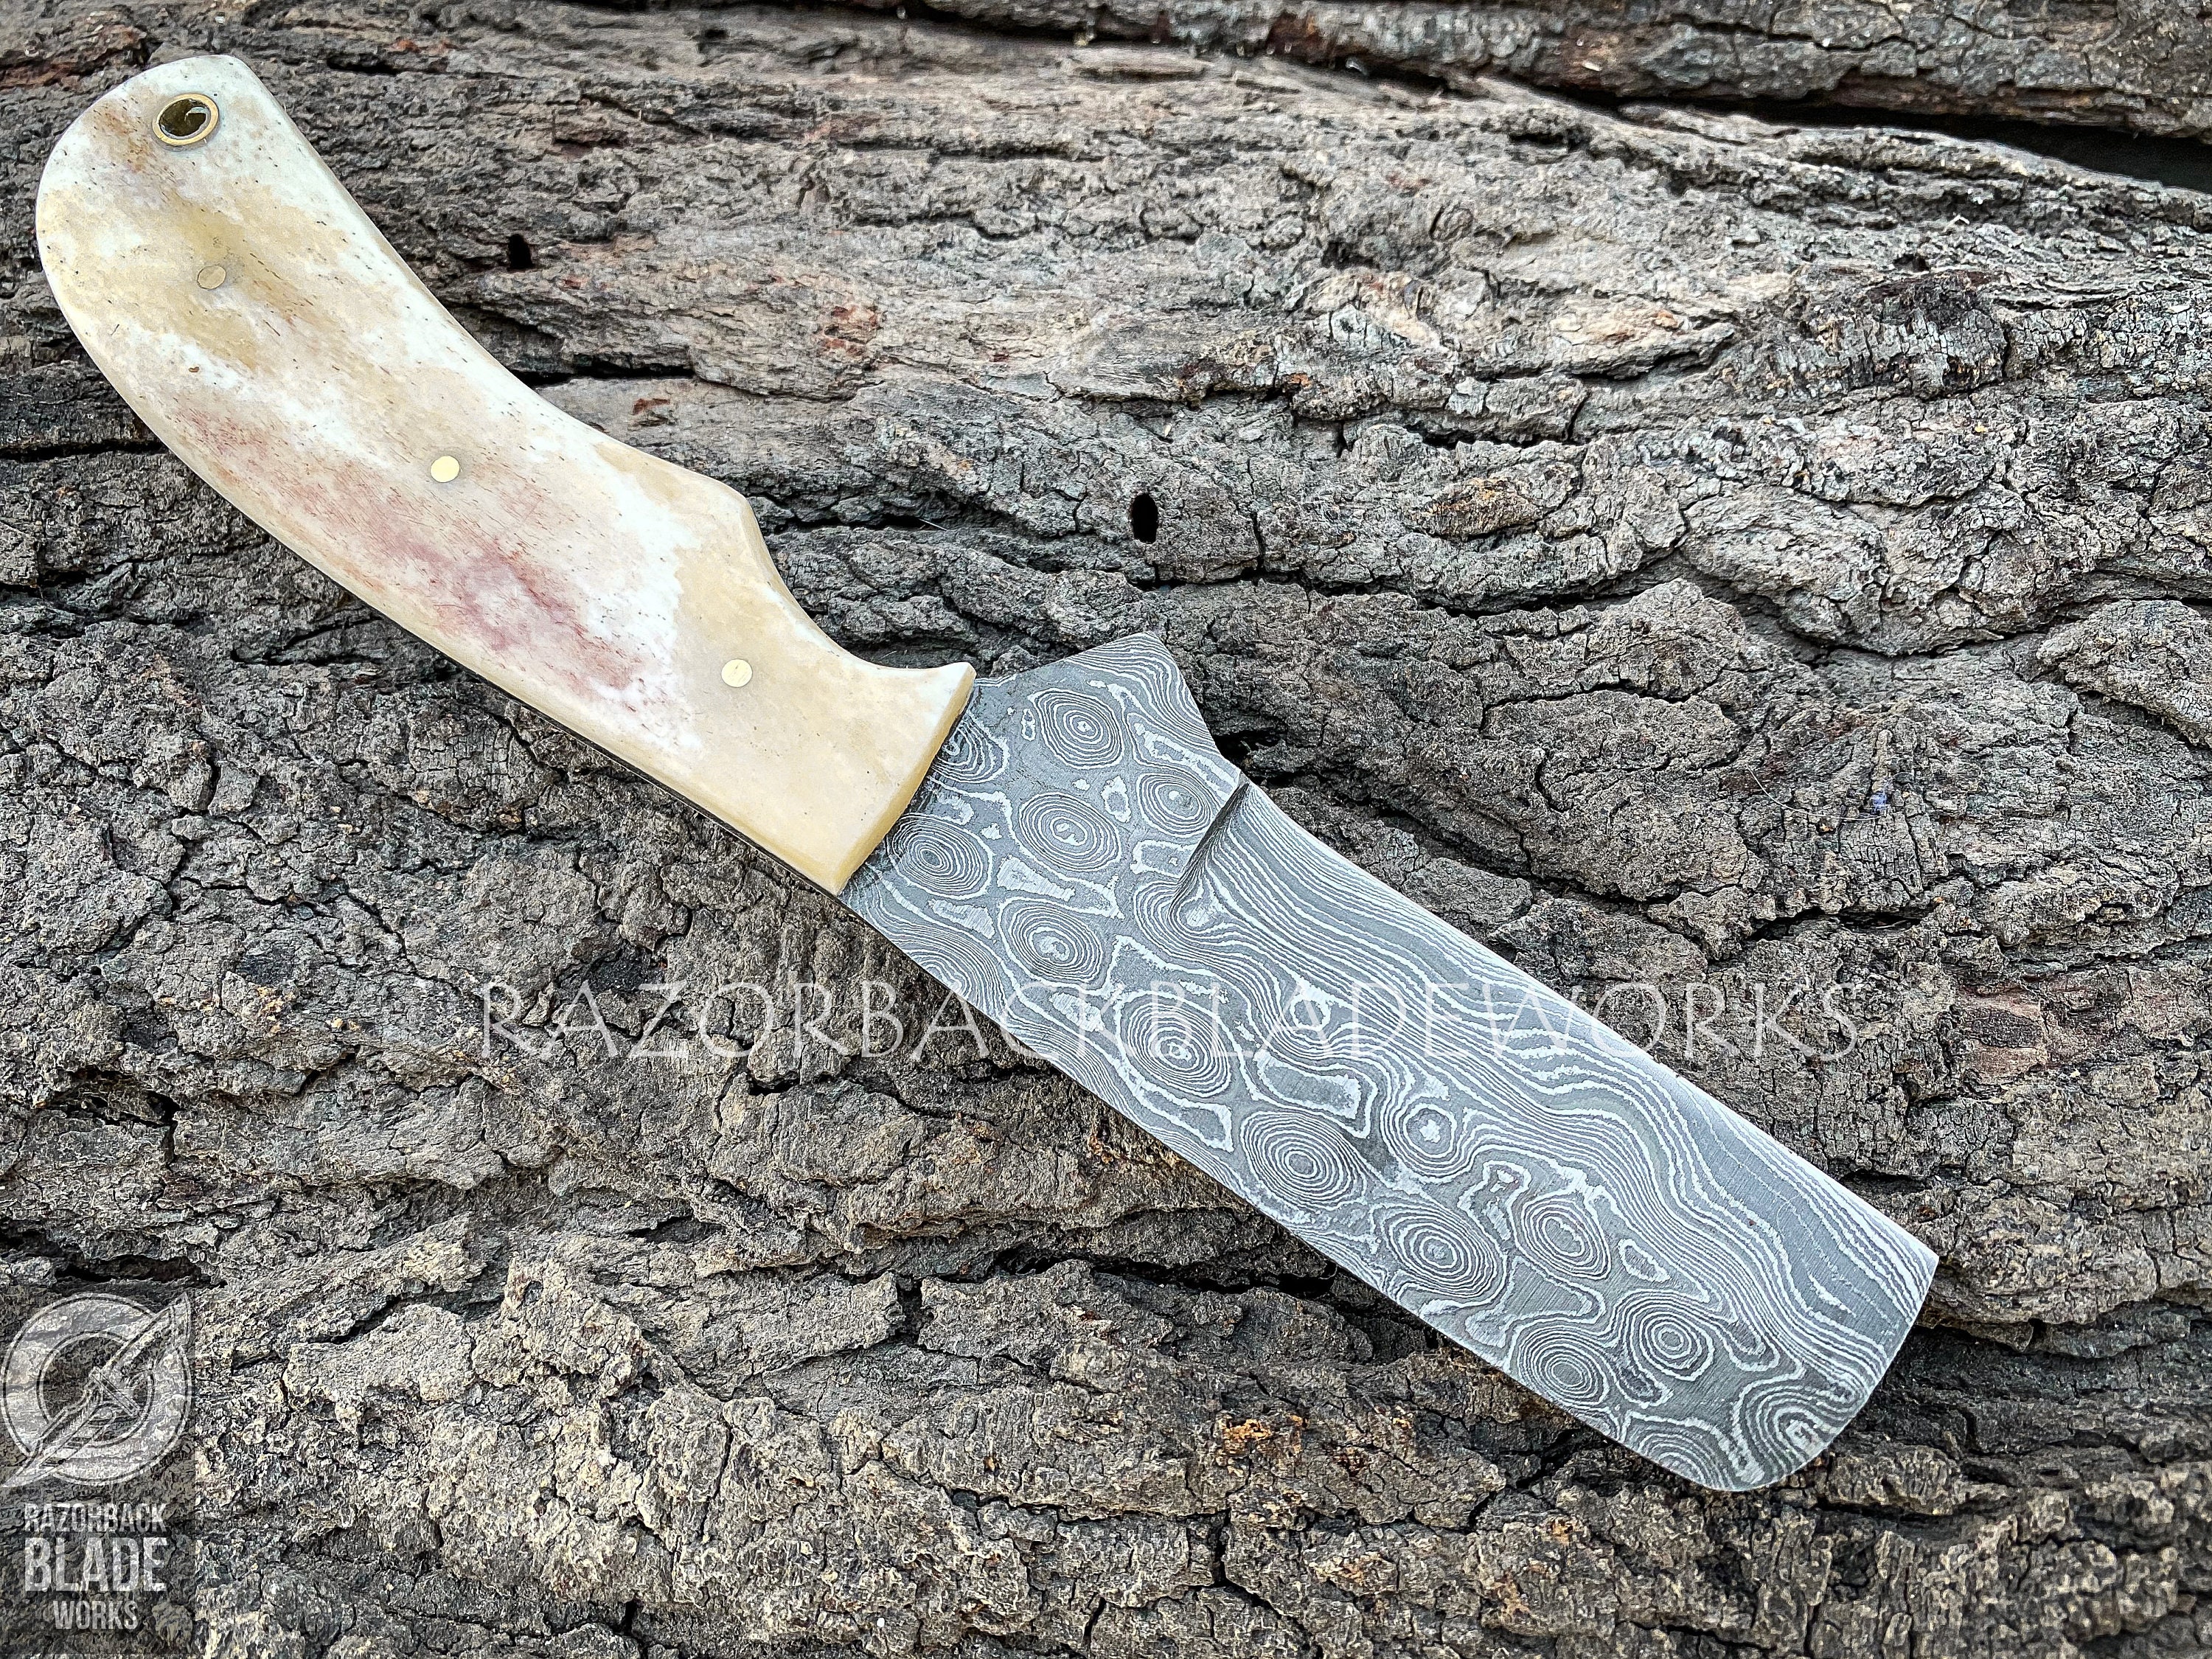 Forseti Steel - We designed the Cattleman Damascus Steel Steak Knives to  have a classic look that a cattleman or rancher would appreciate. It starts  with the full-tang blade and tall height.